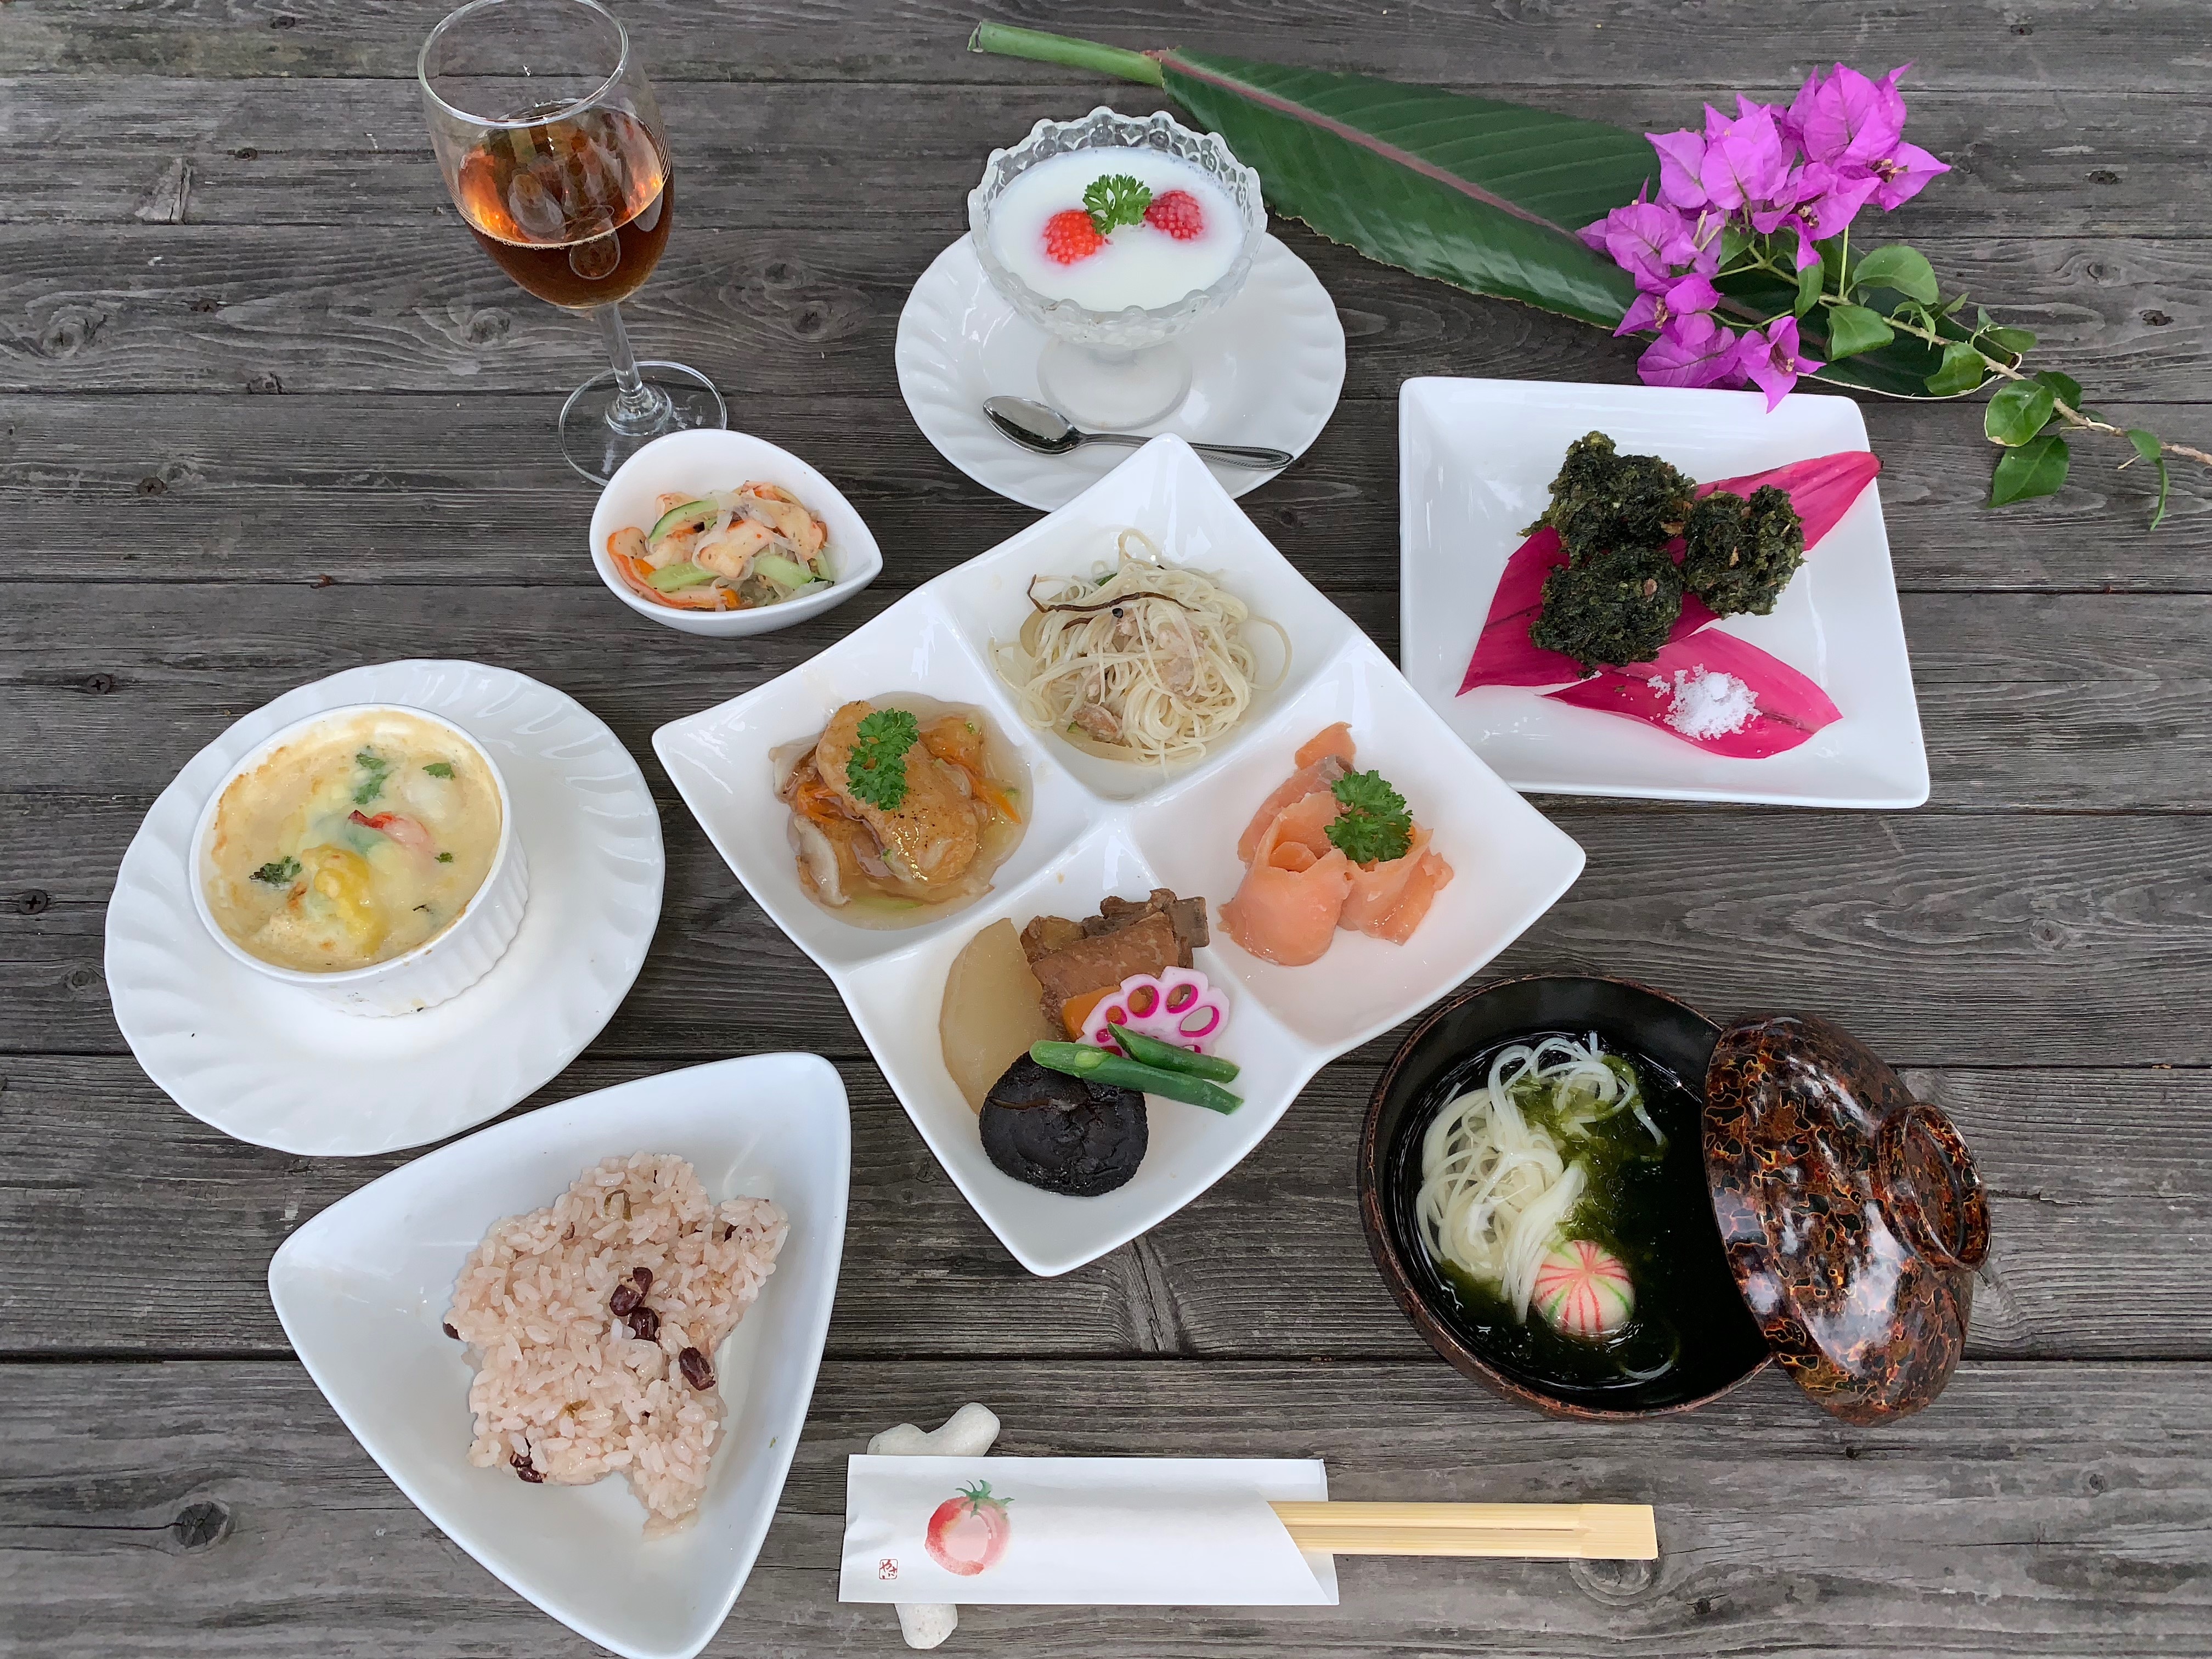 Island cuisine (1,700 yen) * Advance reservation required up to 2 days in advance